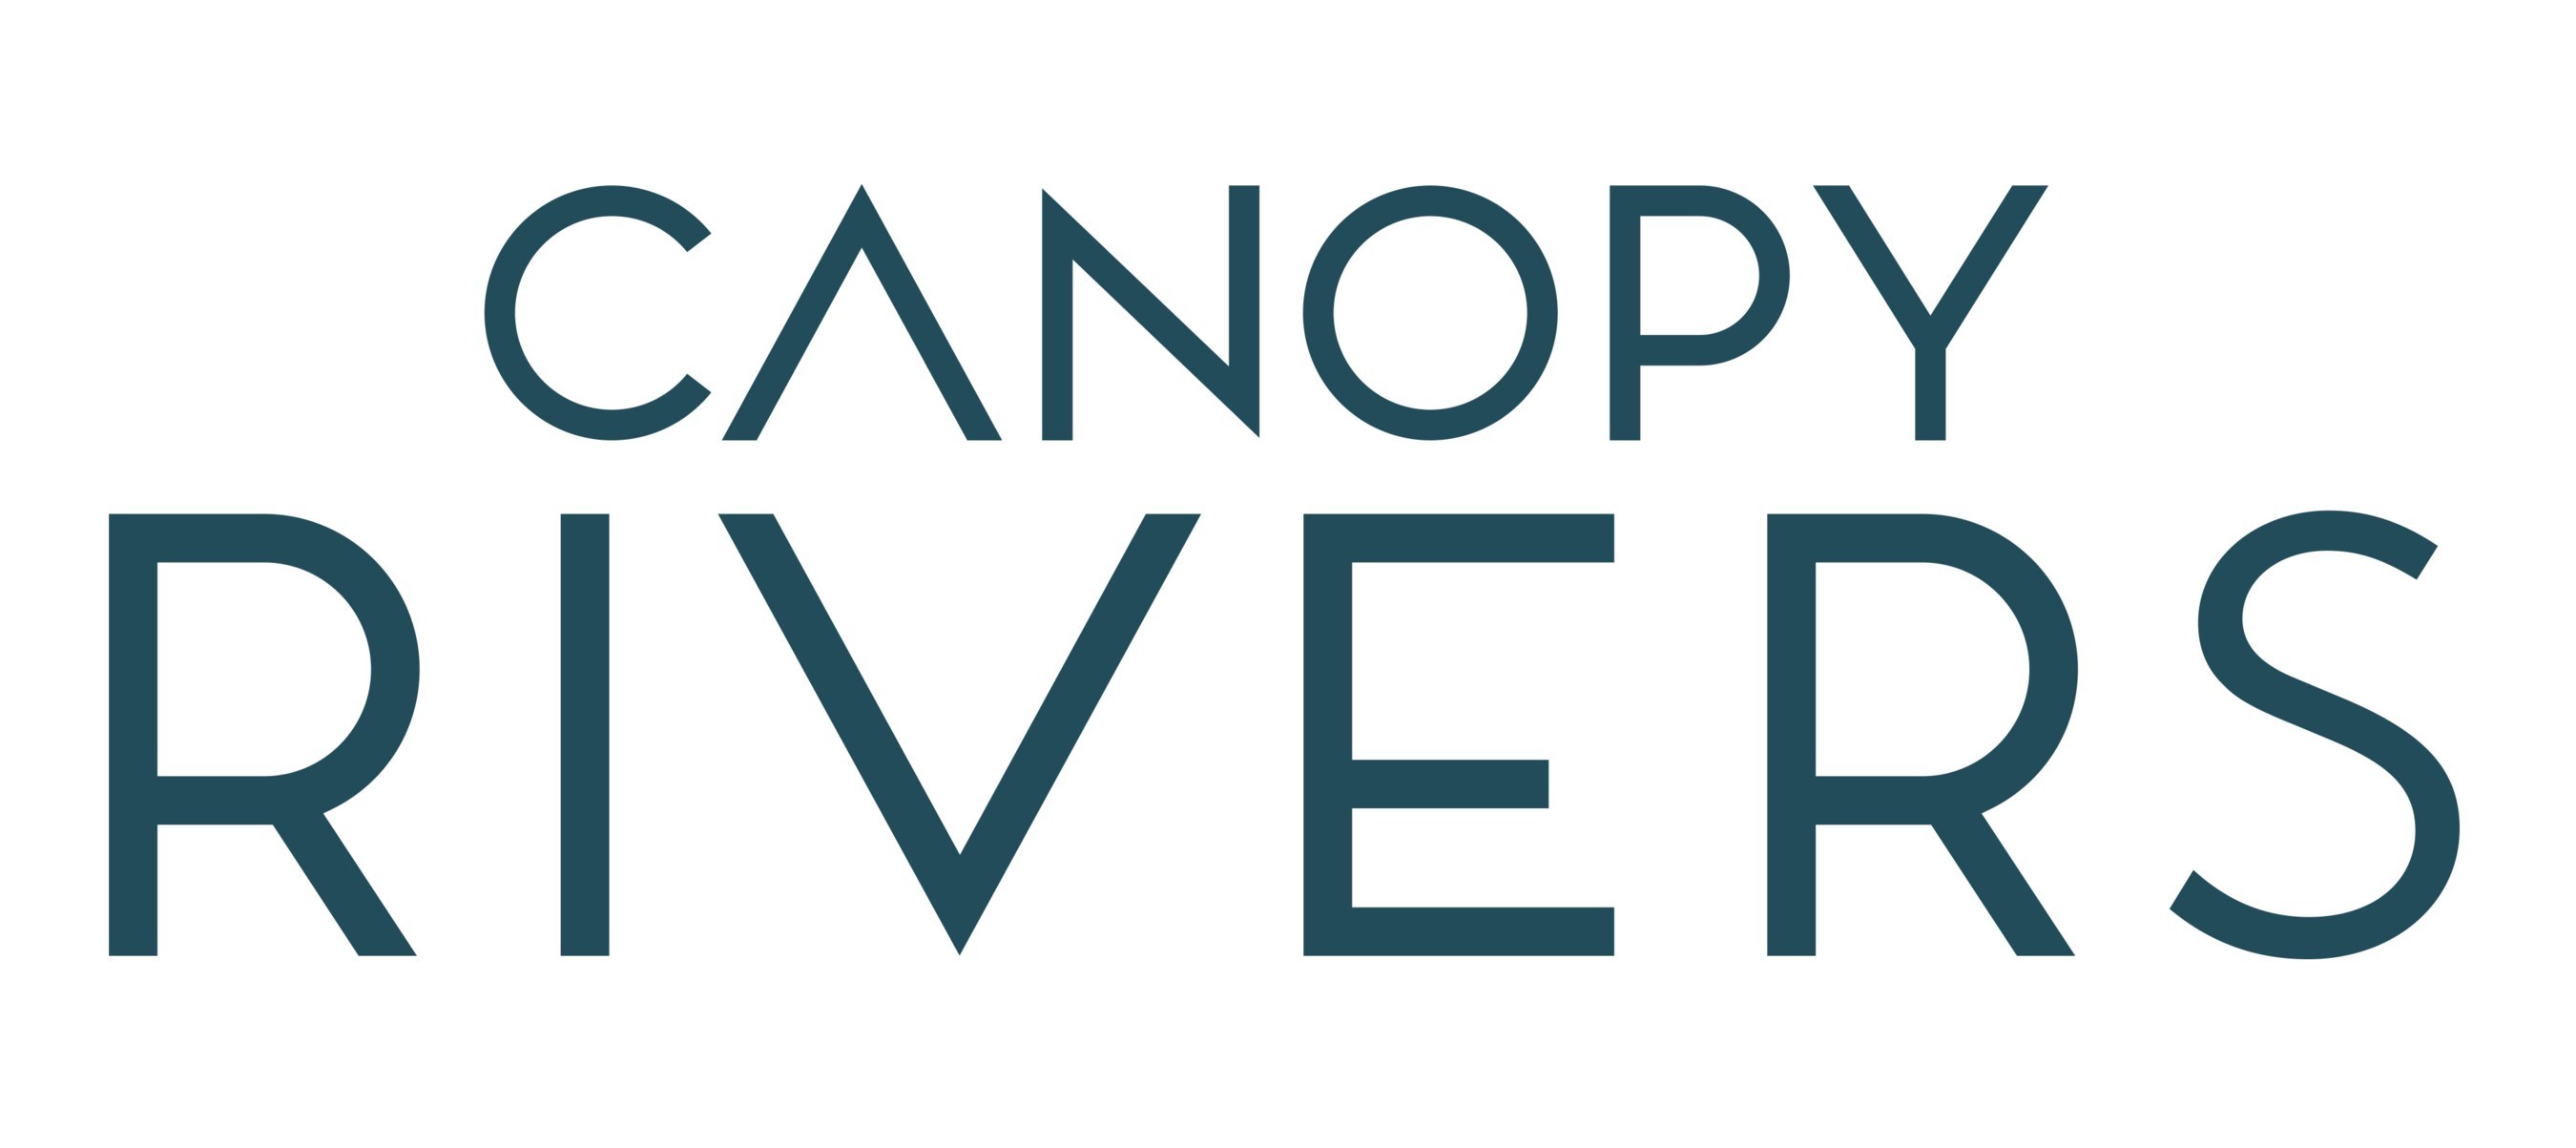 Canopy Rivers logo (CNW Group/Canopy Rivers Inc.)